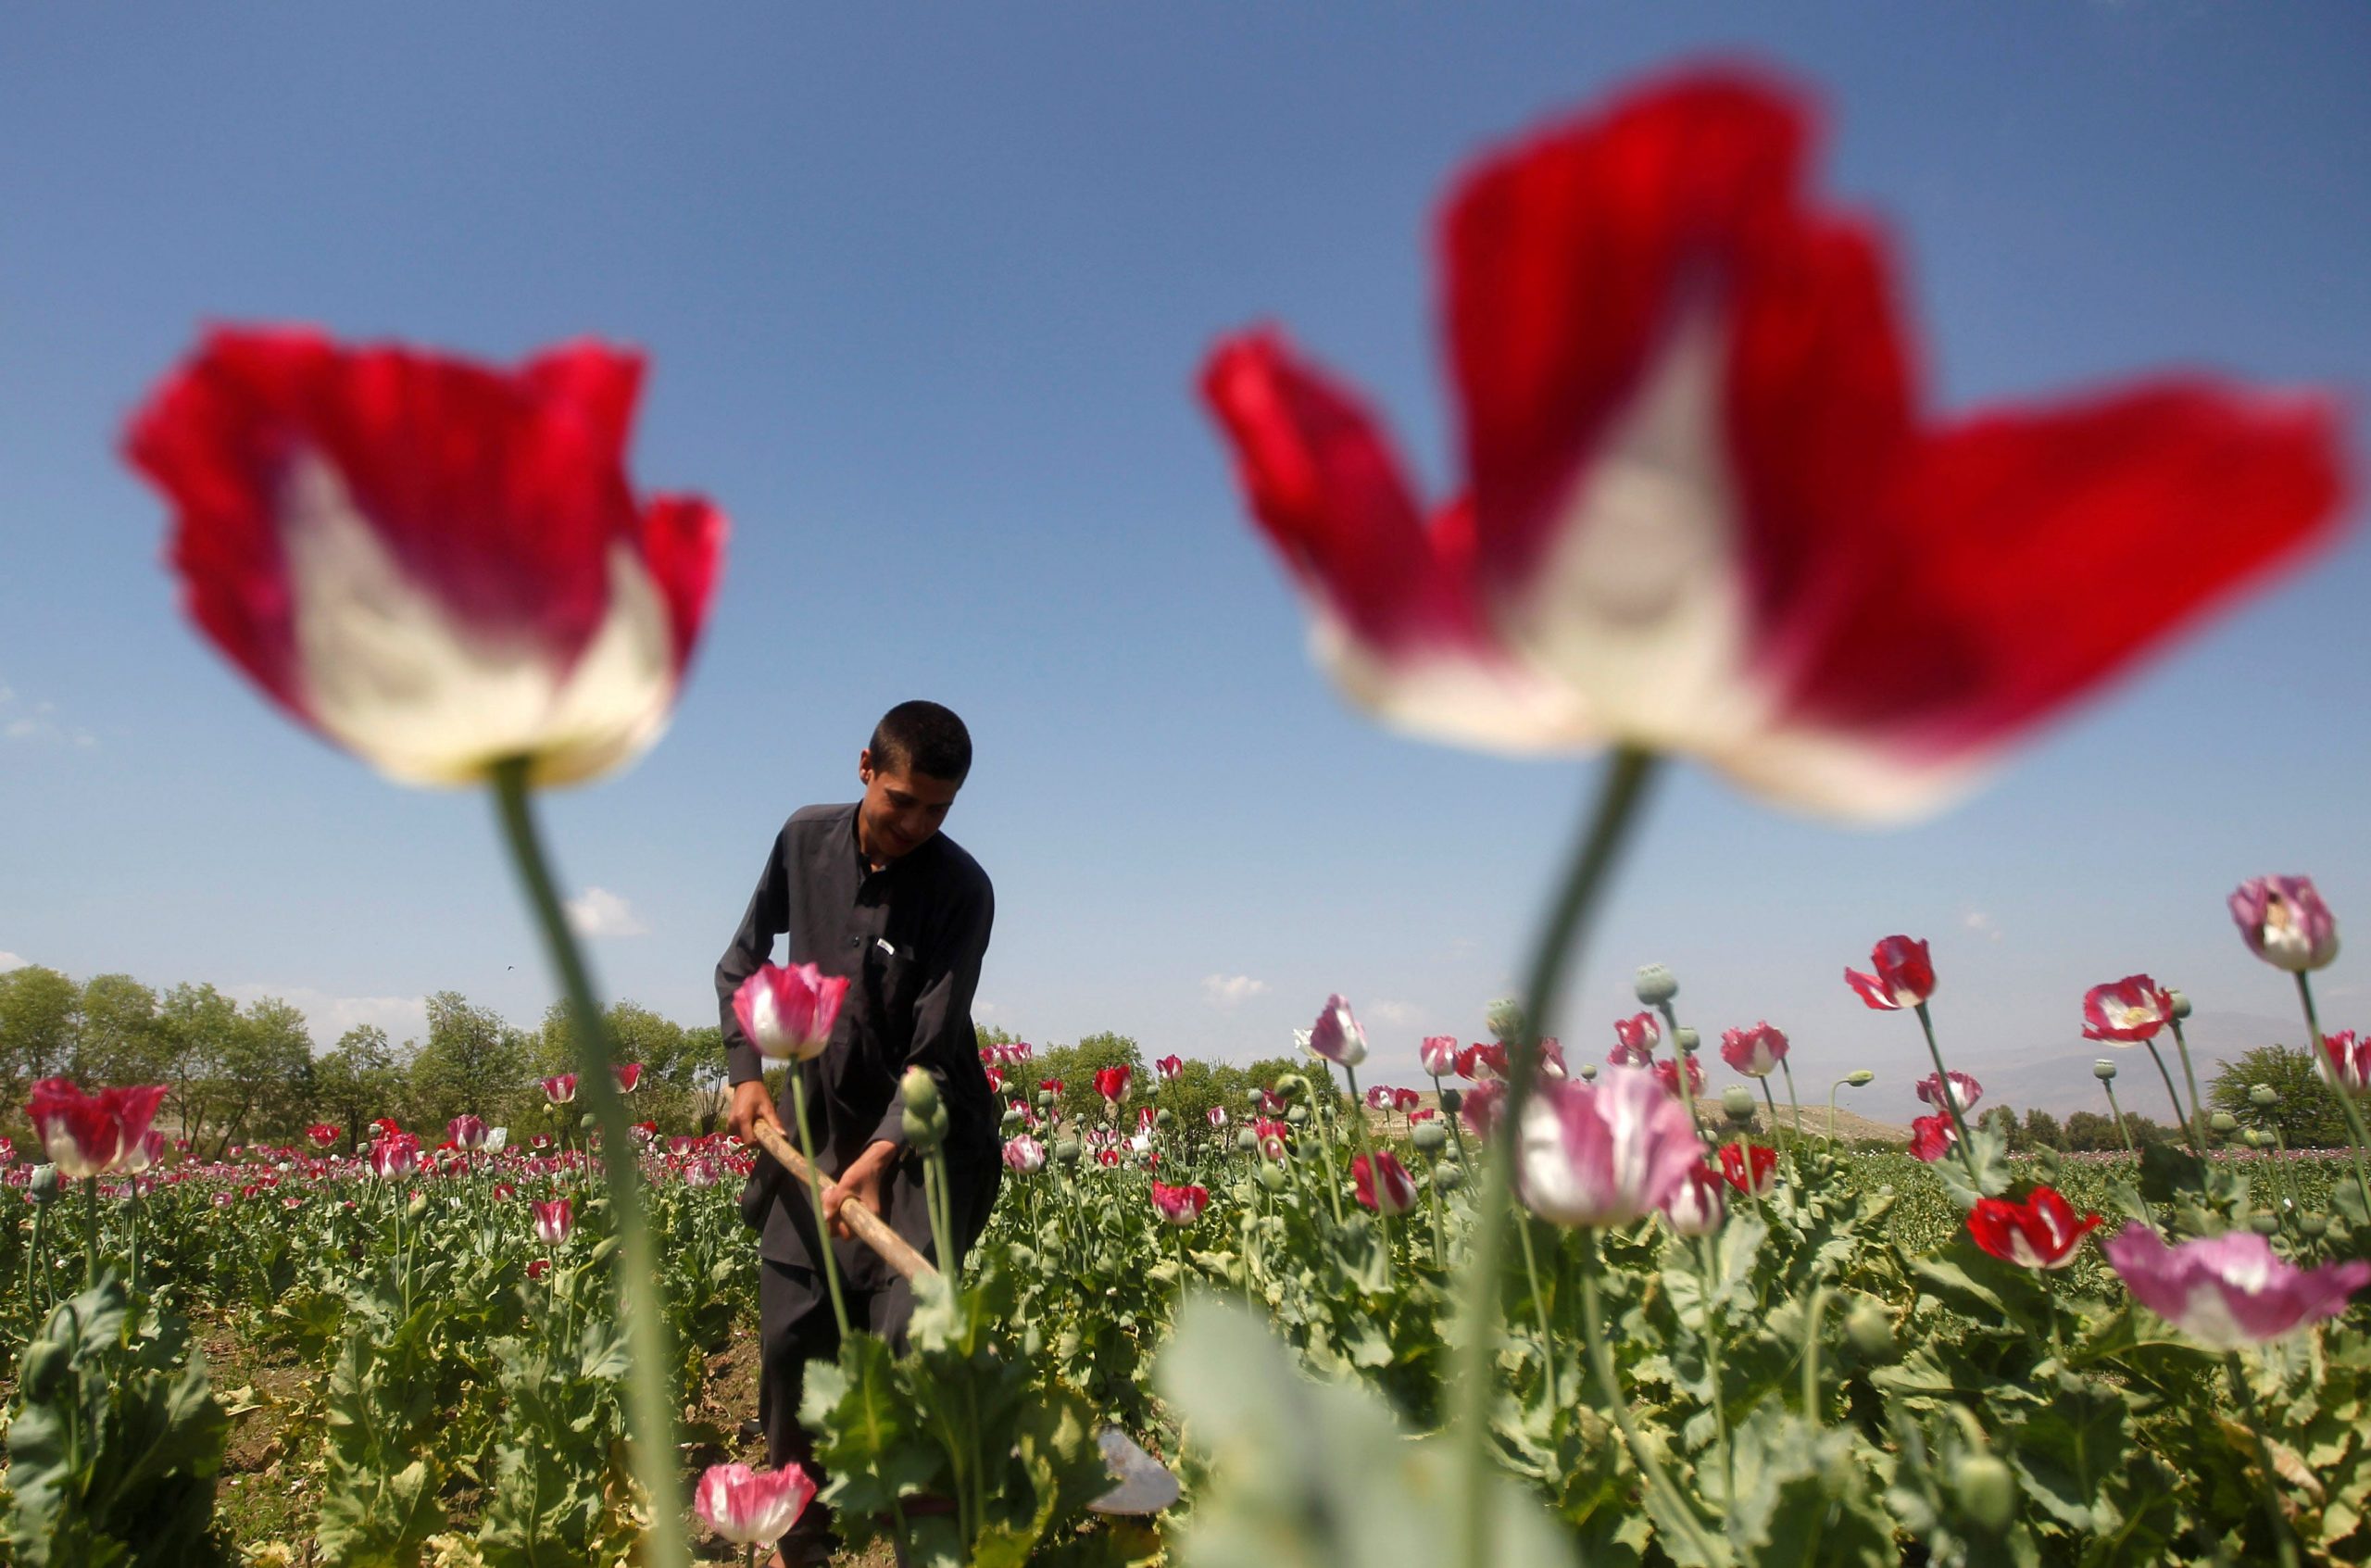 FILE PHOTO: An Afghan man works on a poppy field in Jalalabad province April 17, 2014. REUTERS/ Parwiz/File Photo